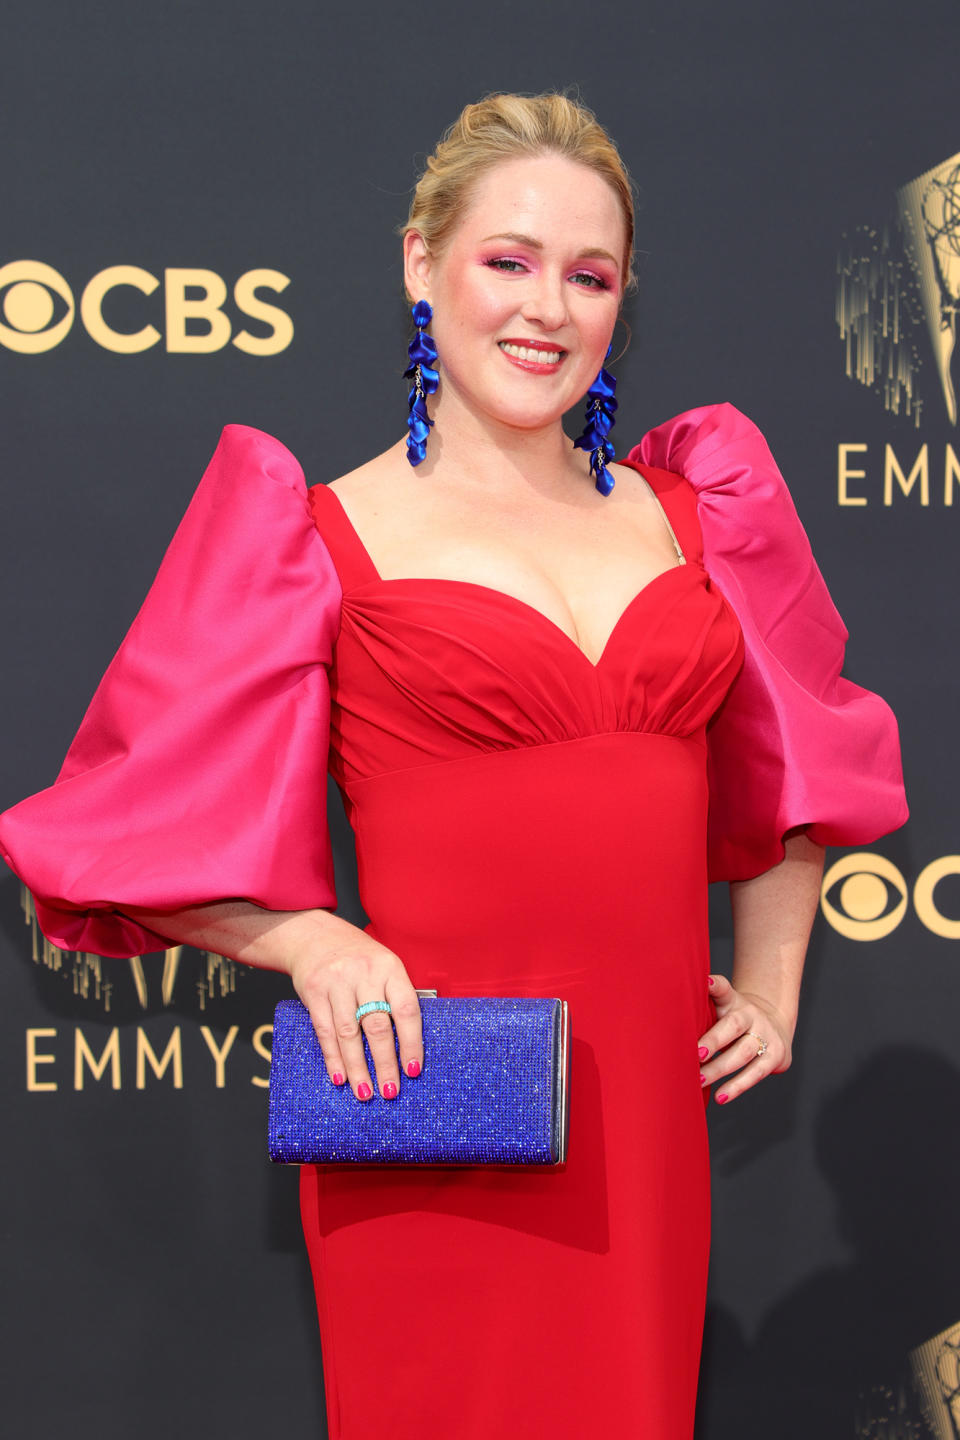 <p>While screenwriter Ariel Dumas may work behind the scenes, her makeup for tonight's Emmy Awards put her center stage. Her bright pink eyes and glossy red lip are simply unforgettable — and to keep the focus on her bold makeup, Dumas wore her hair pulled back. </p>